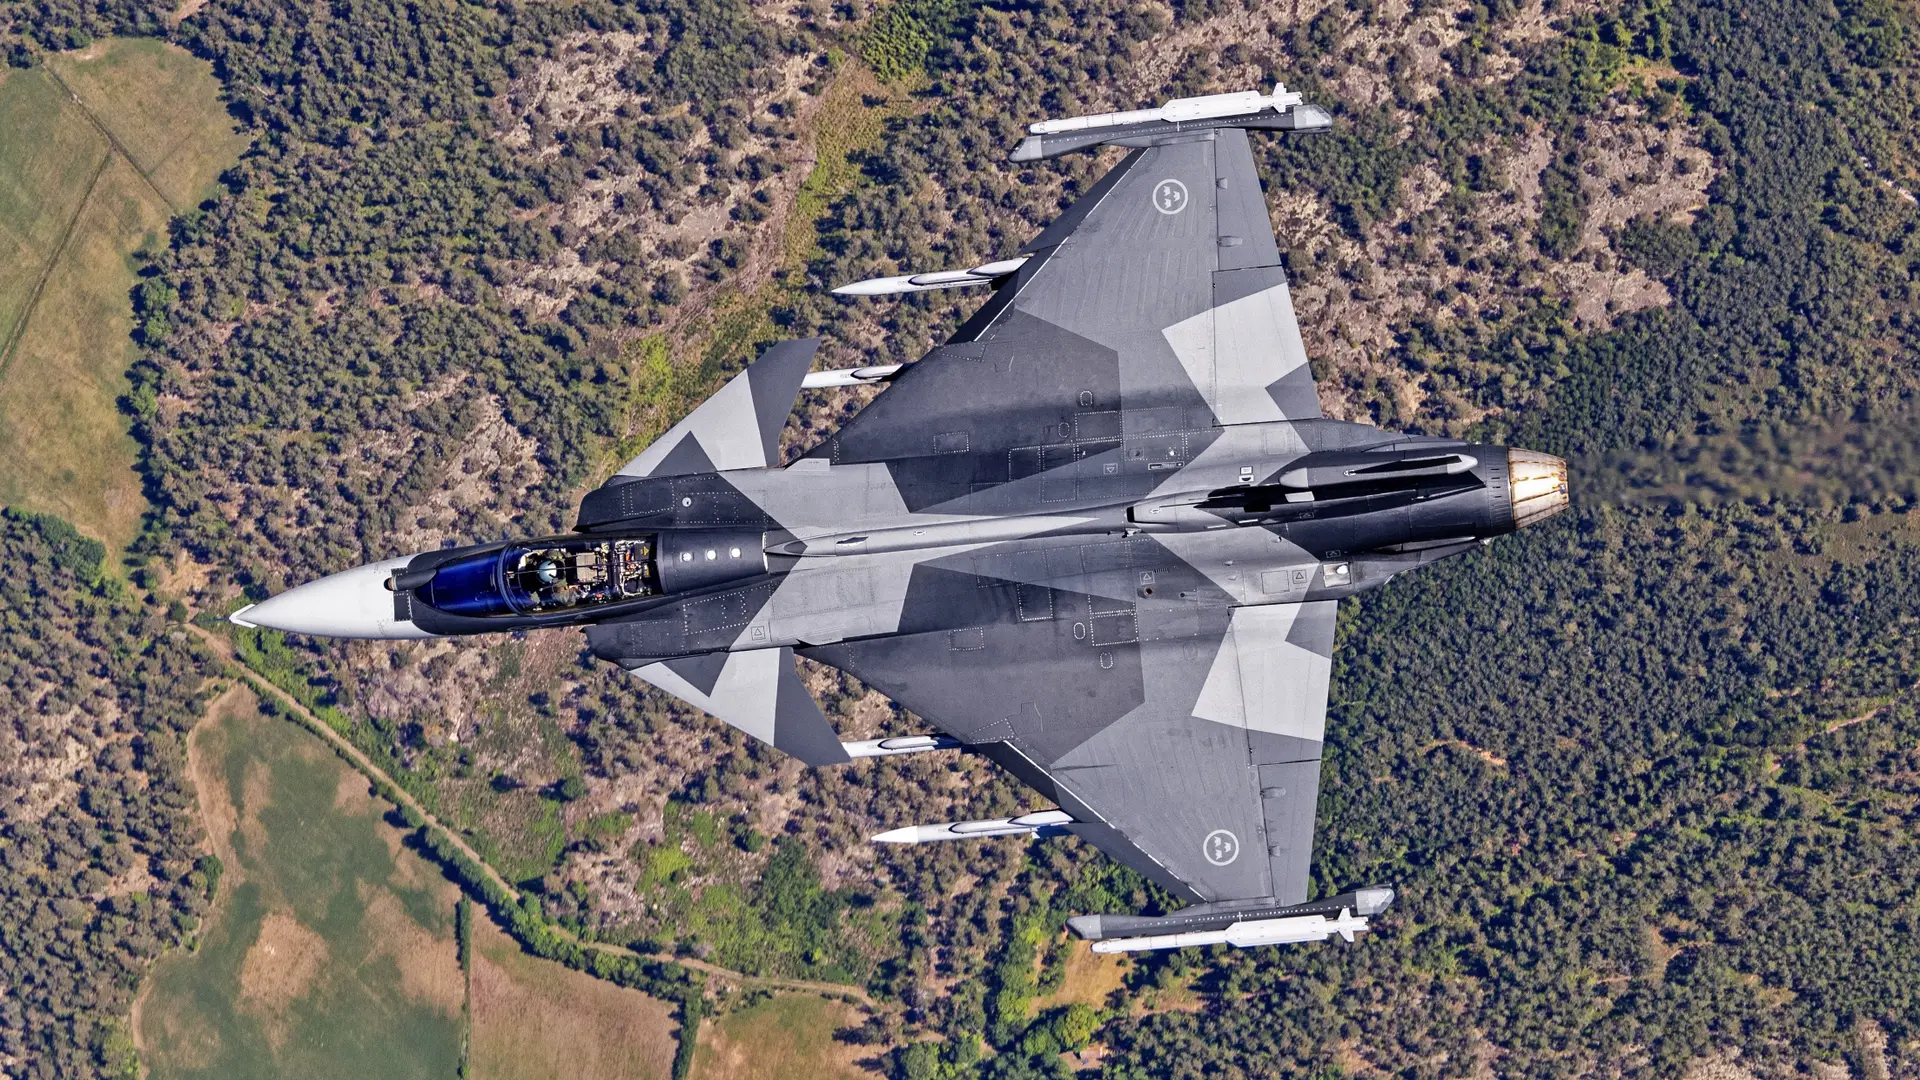 The modernised JAS 39 Gripen E fighter has a larger wing for increased manoeuvrability and can carry more missiles